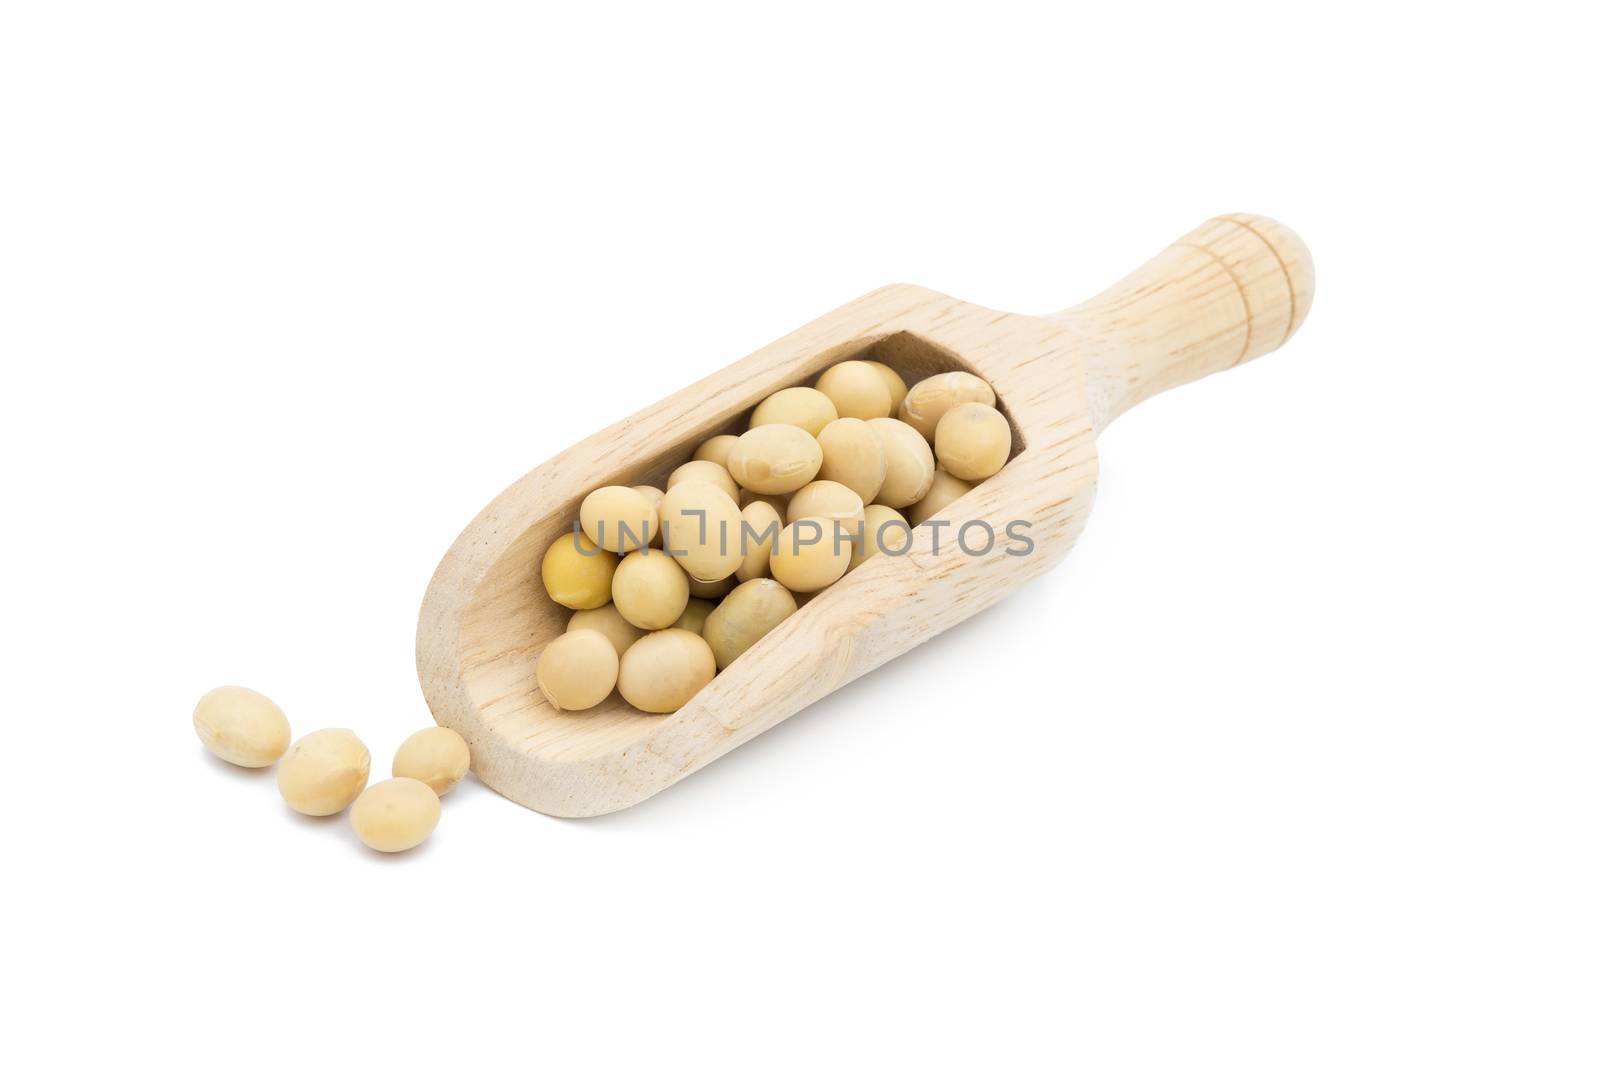 Soybean in wooden scoop isolated on white background.